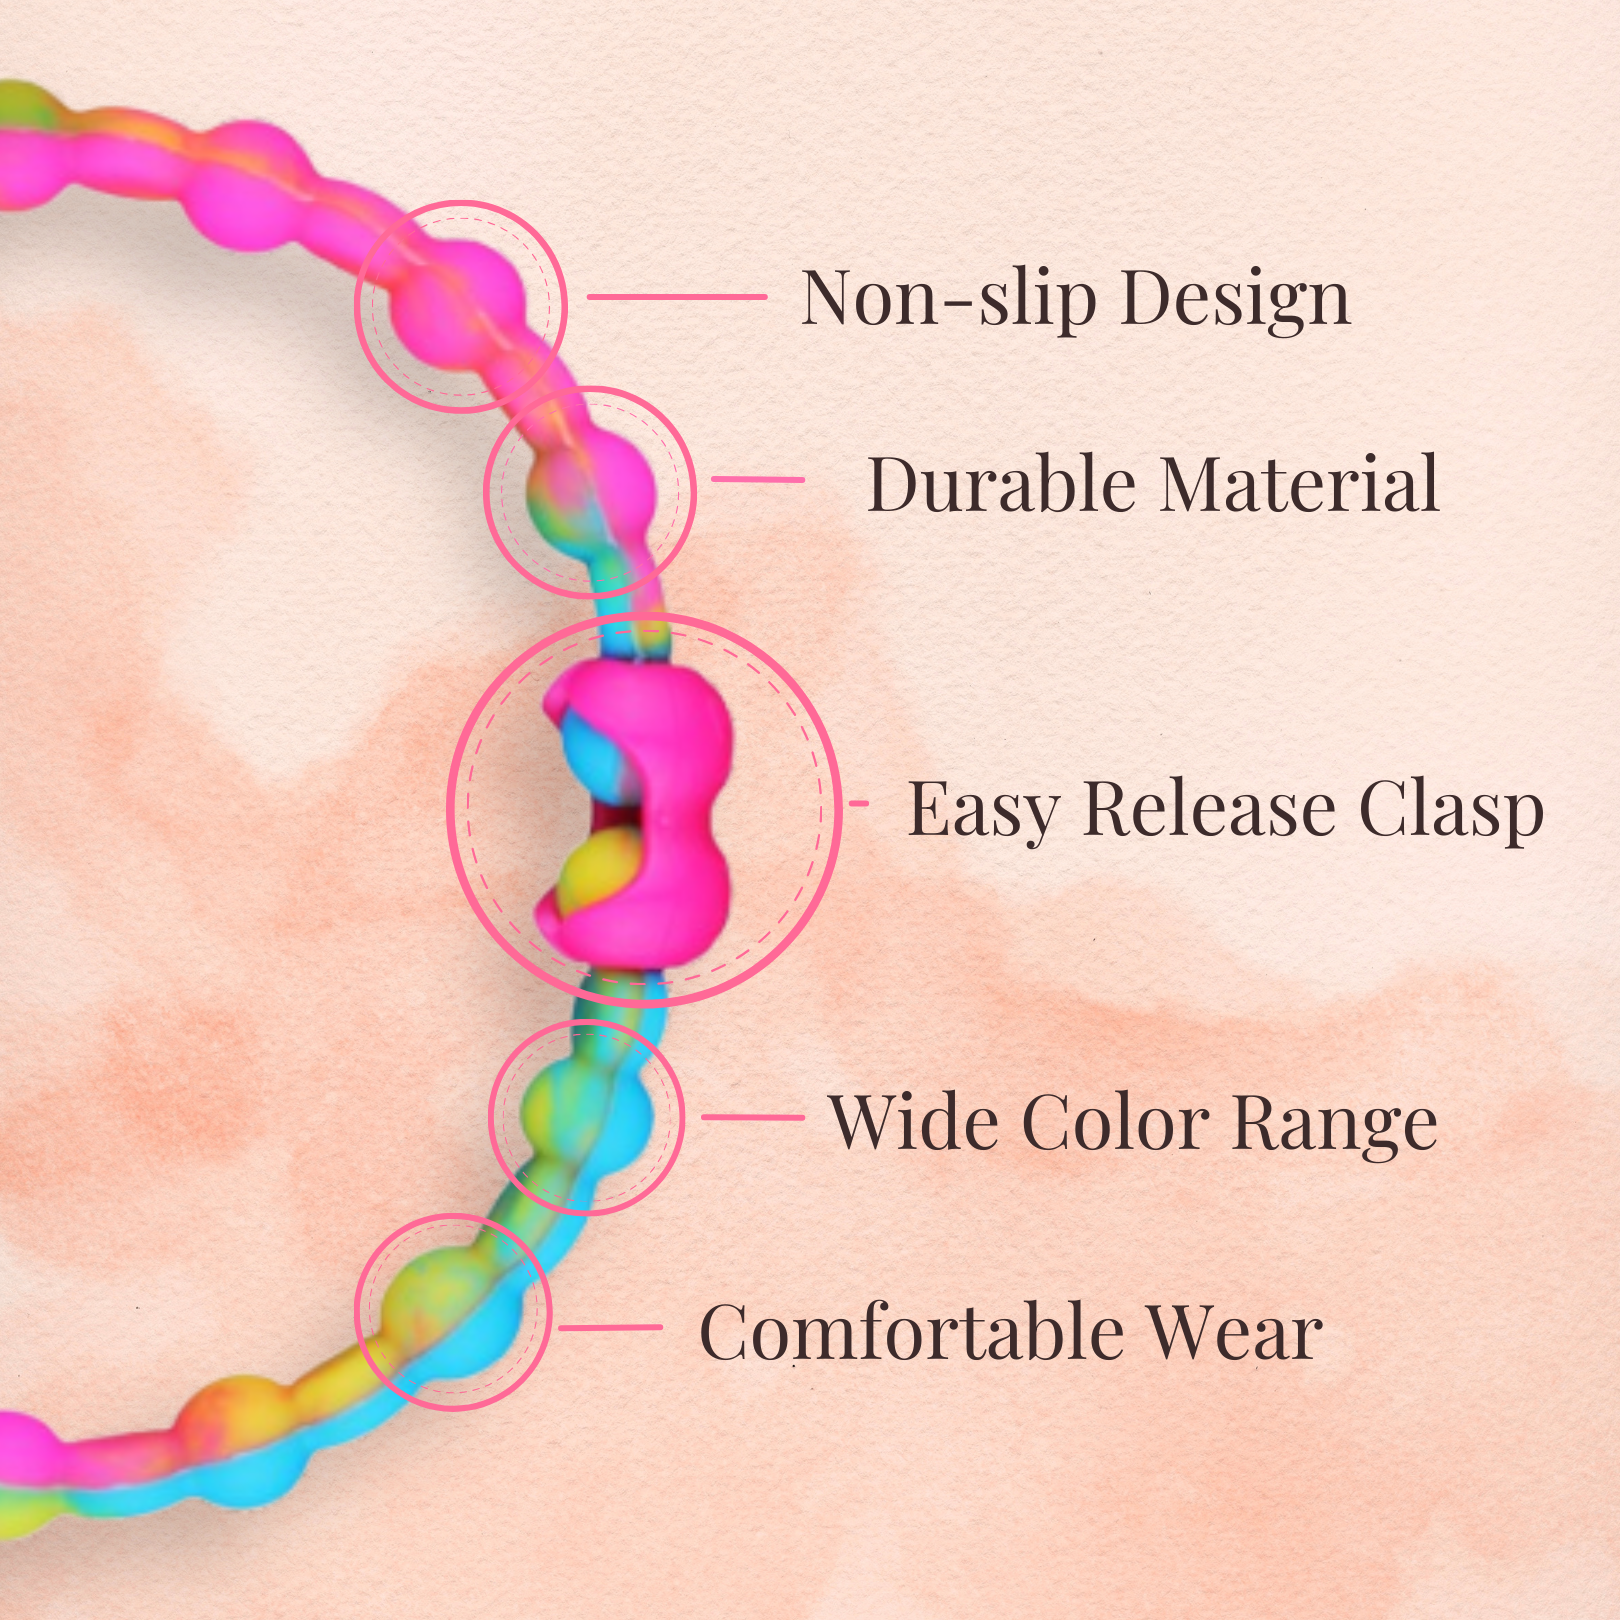 Autumn Whisper Pack PRO Hair Ties: Easy Release Adjustable for Every Hair Type PACK OF 4